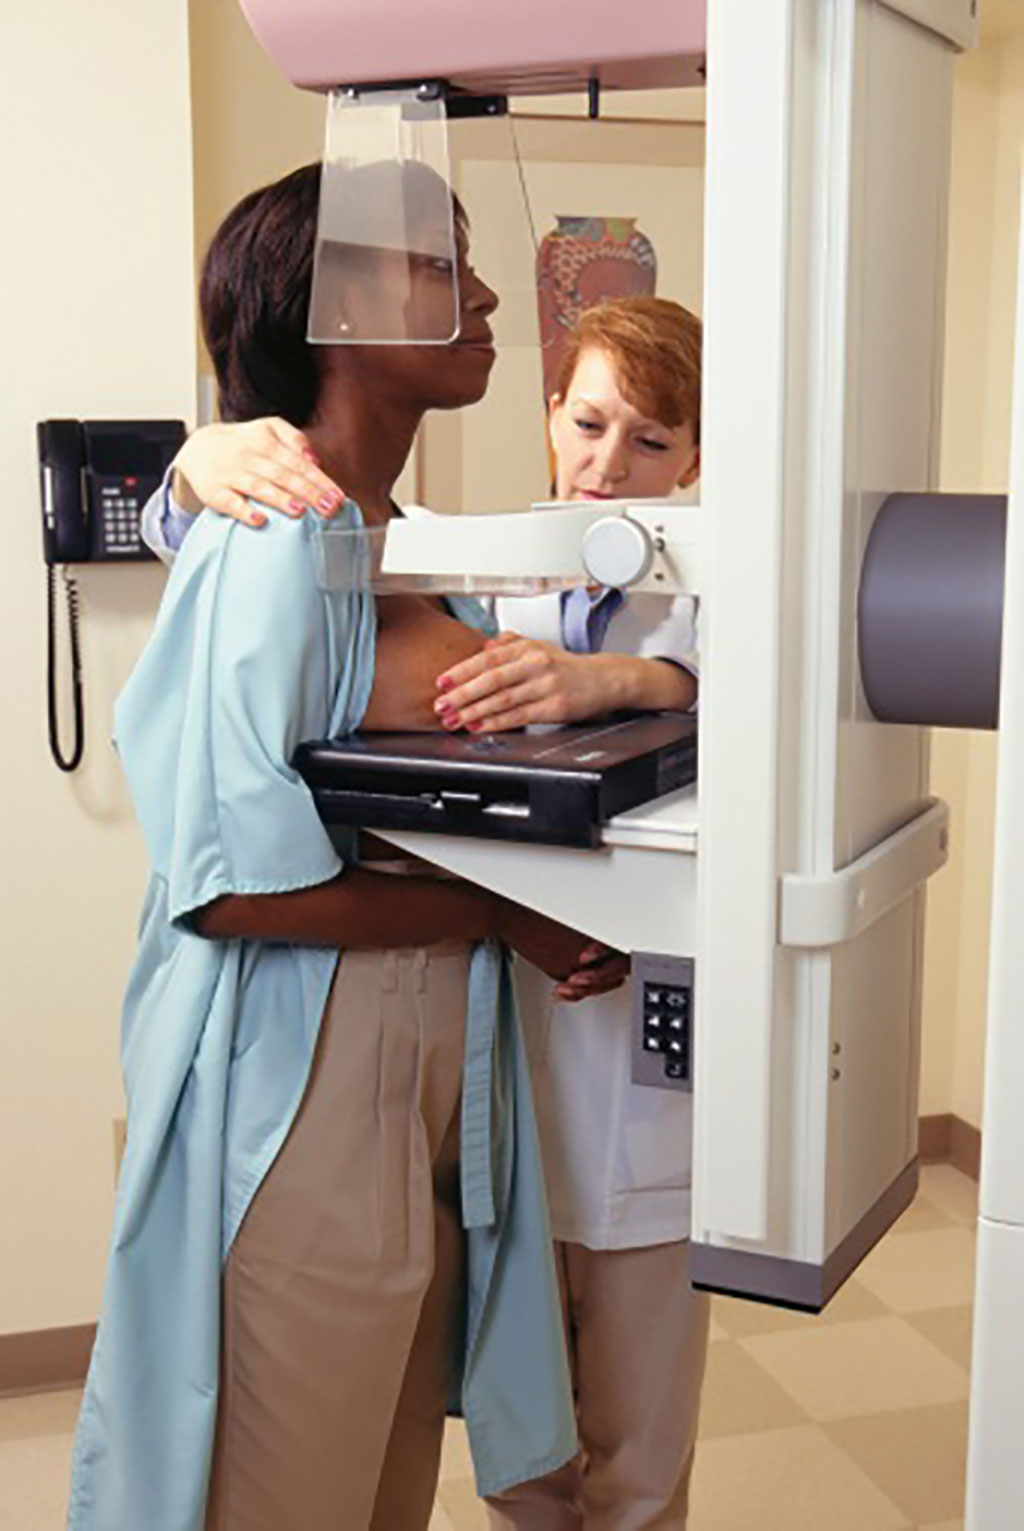 Image: Global mammography market to reach USD 3.4 Billion in 2028 due to increasing prevalence of breast cancer (Photo courtesy of CDC)